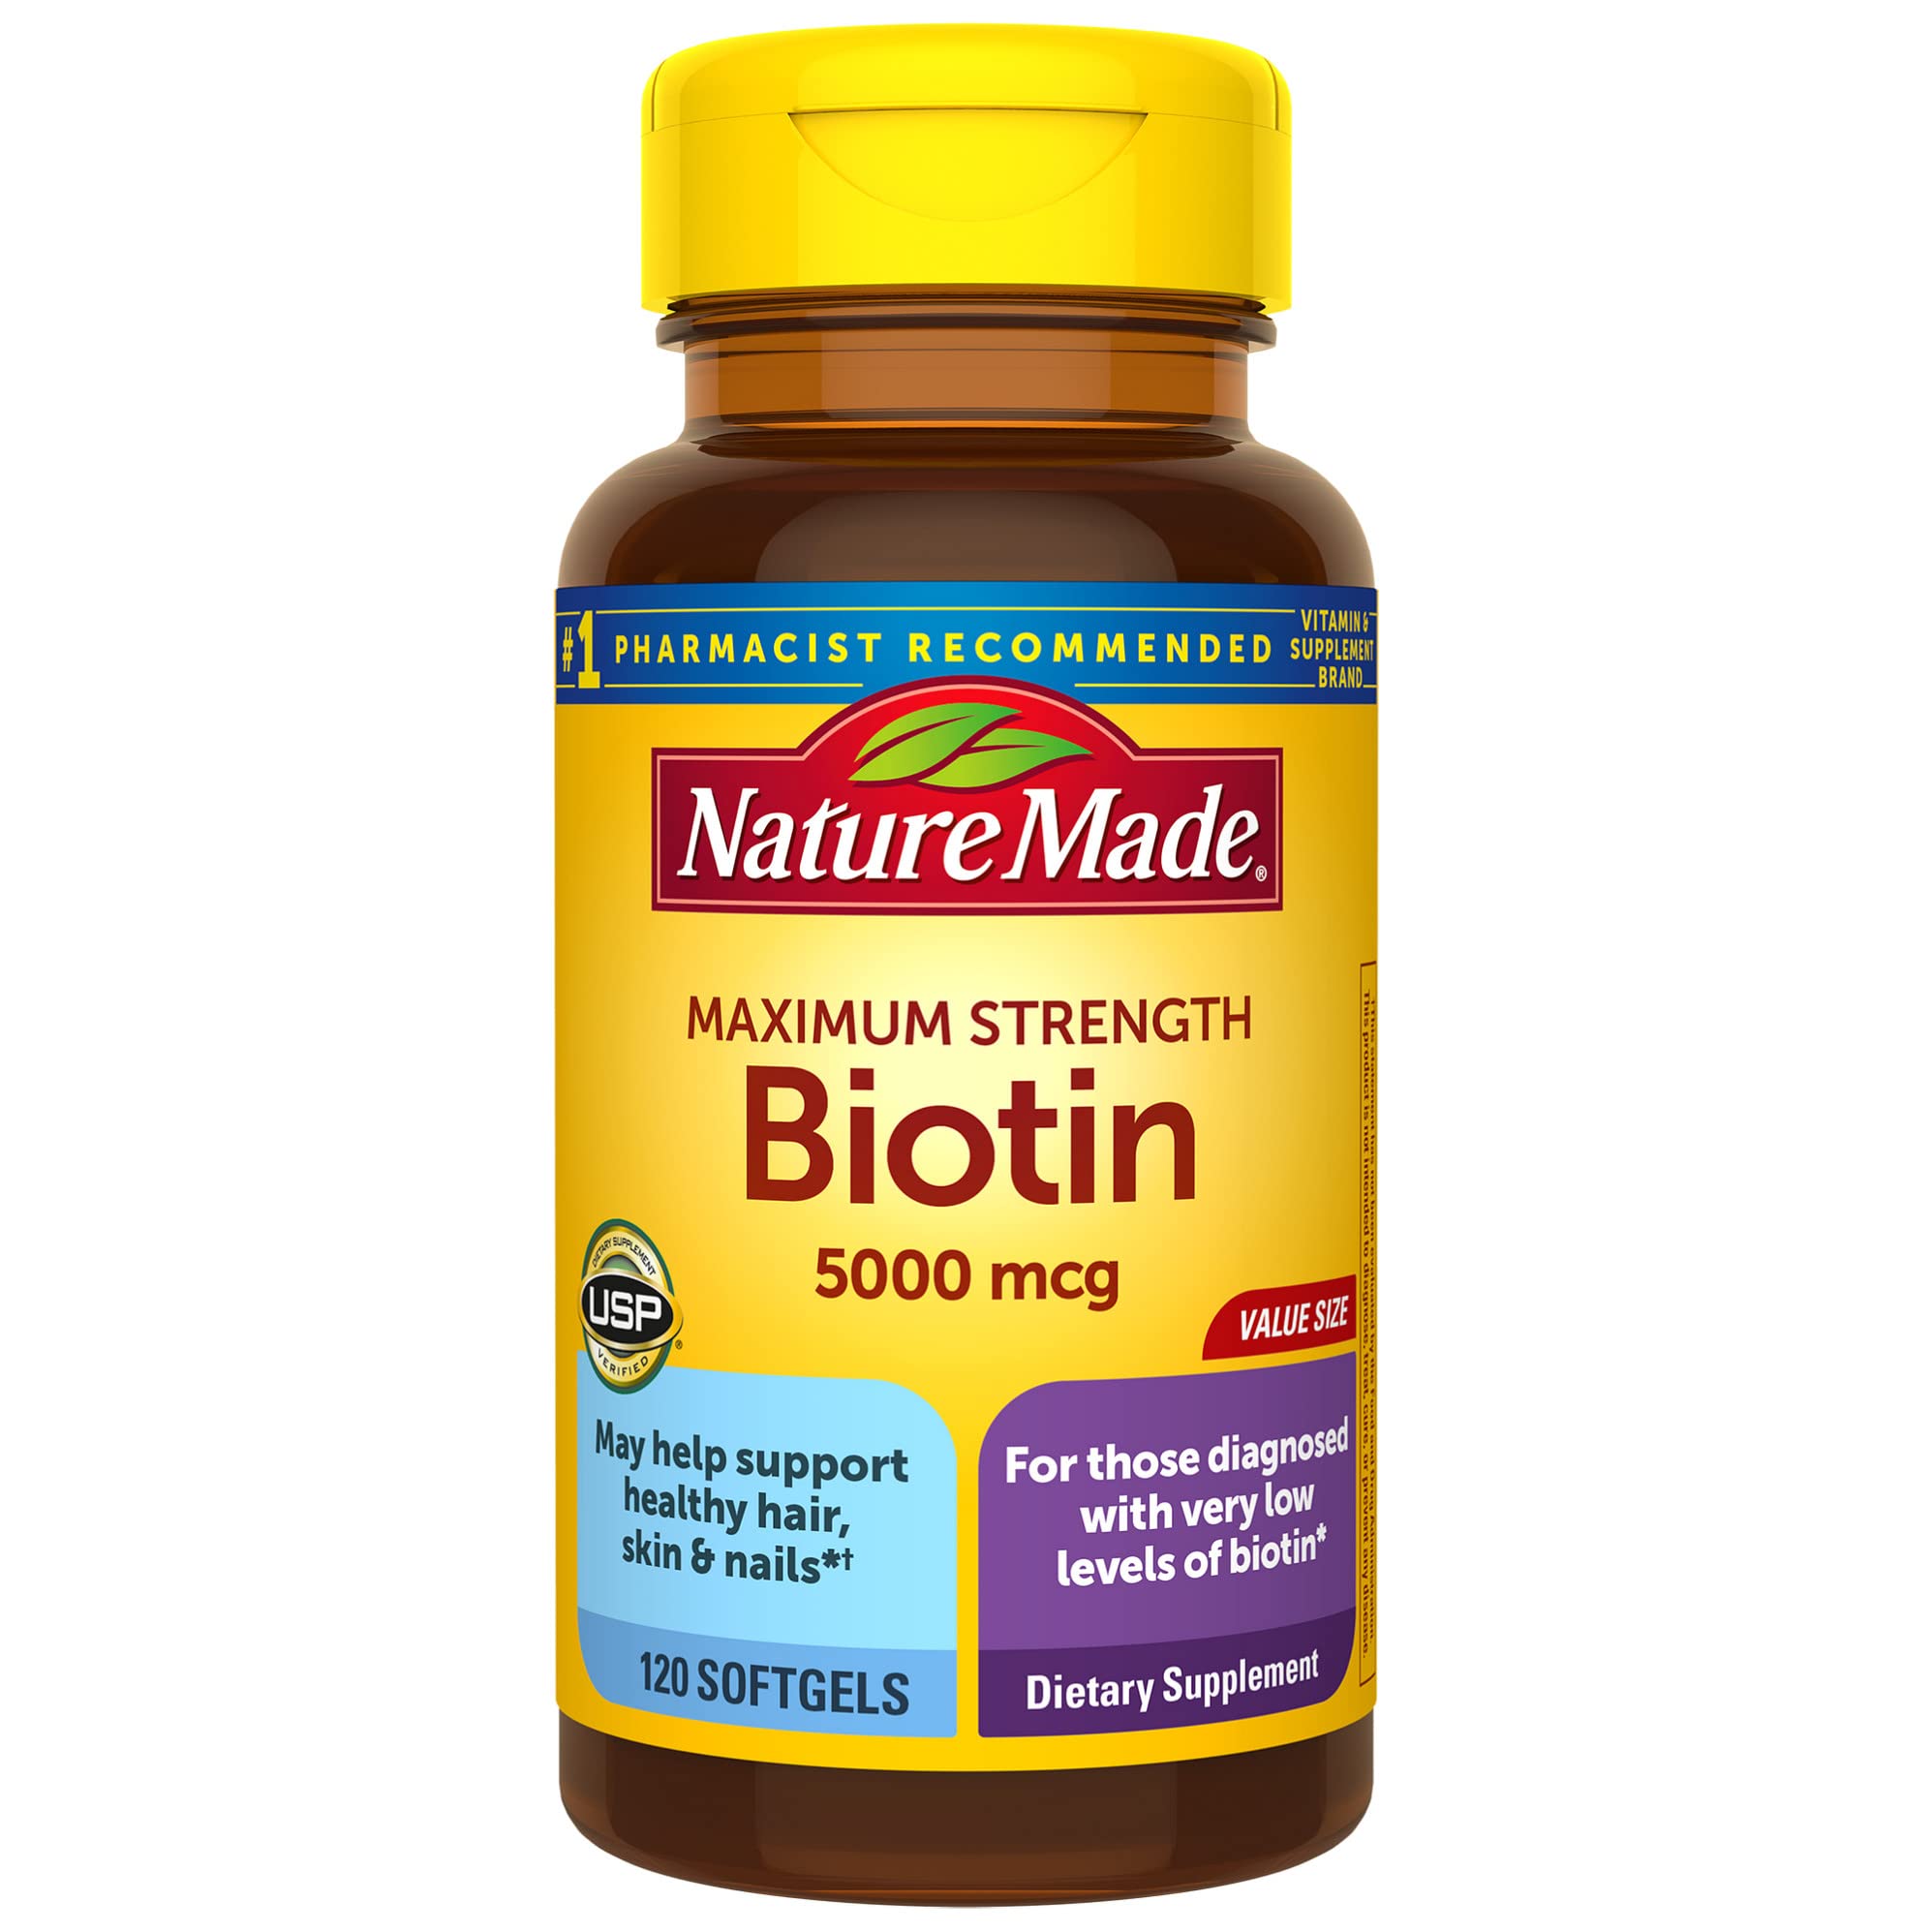 Nature Made Maximum Strength Biotin 5000 mcg, Dietary Supplement may help  support Healthy Hair, Skin & Nails, 120 Softgels 120 Count (Pack of 1)